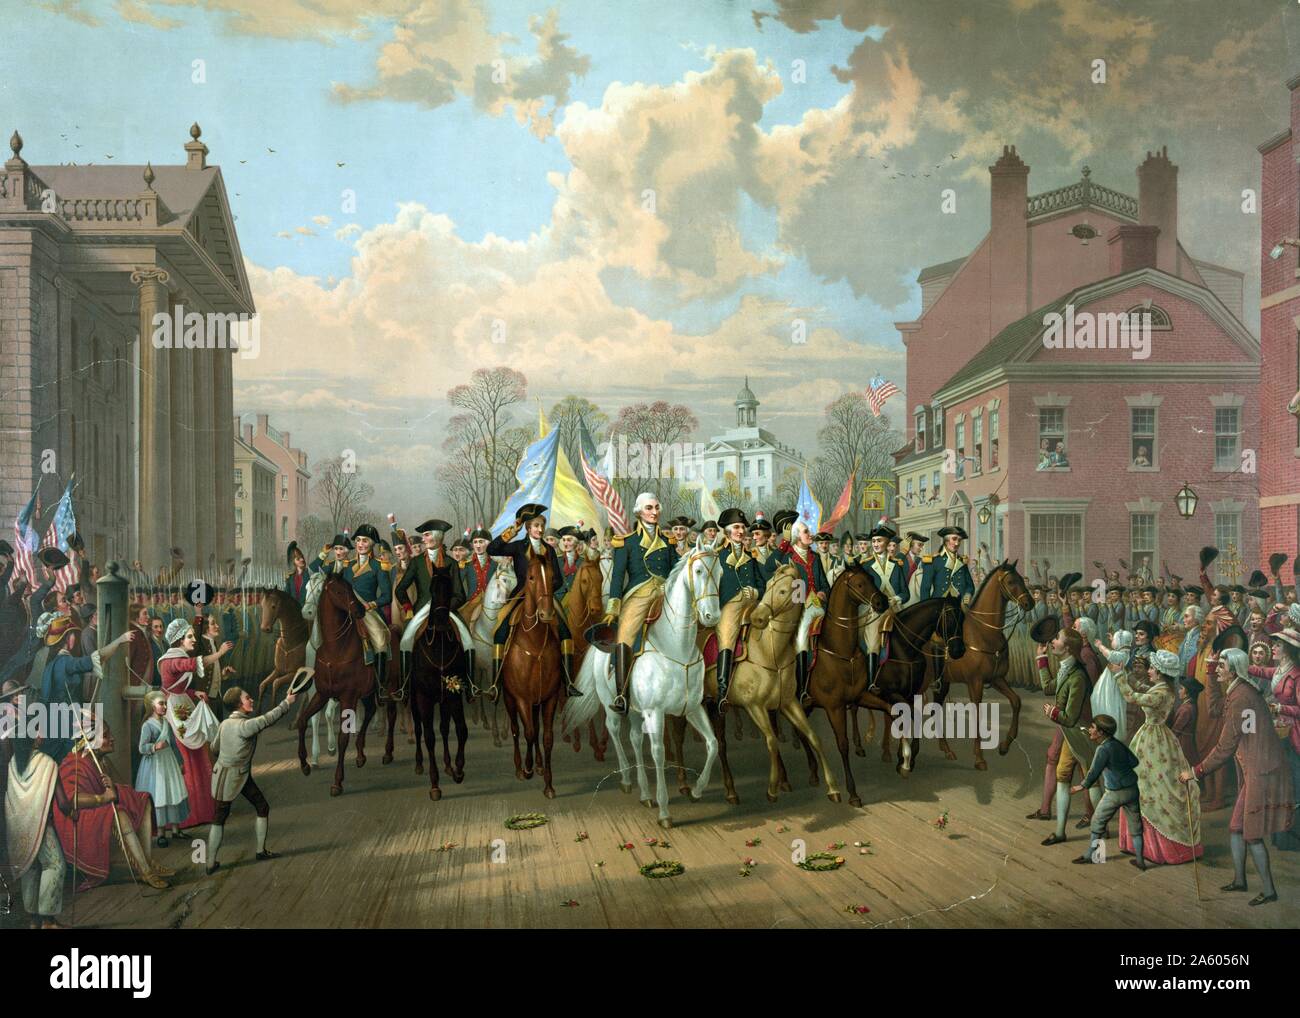 George Washington and other military officers riding on horseback along the street, on Evacuation day. A public holiday in Suffolk County, to celebrate the evacuation of the British forces in 1776. Stock Photo